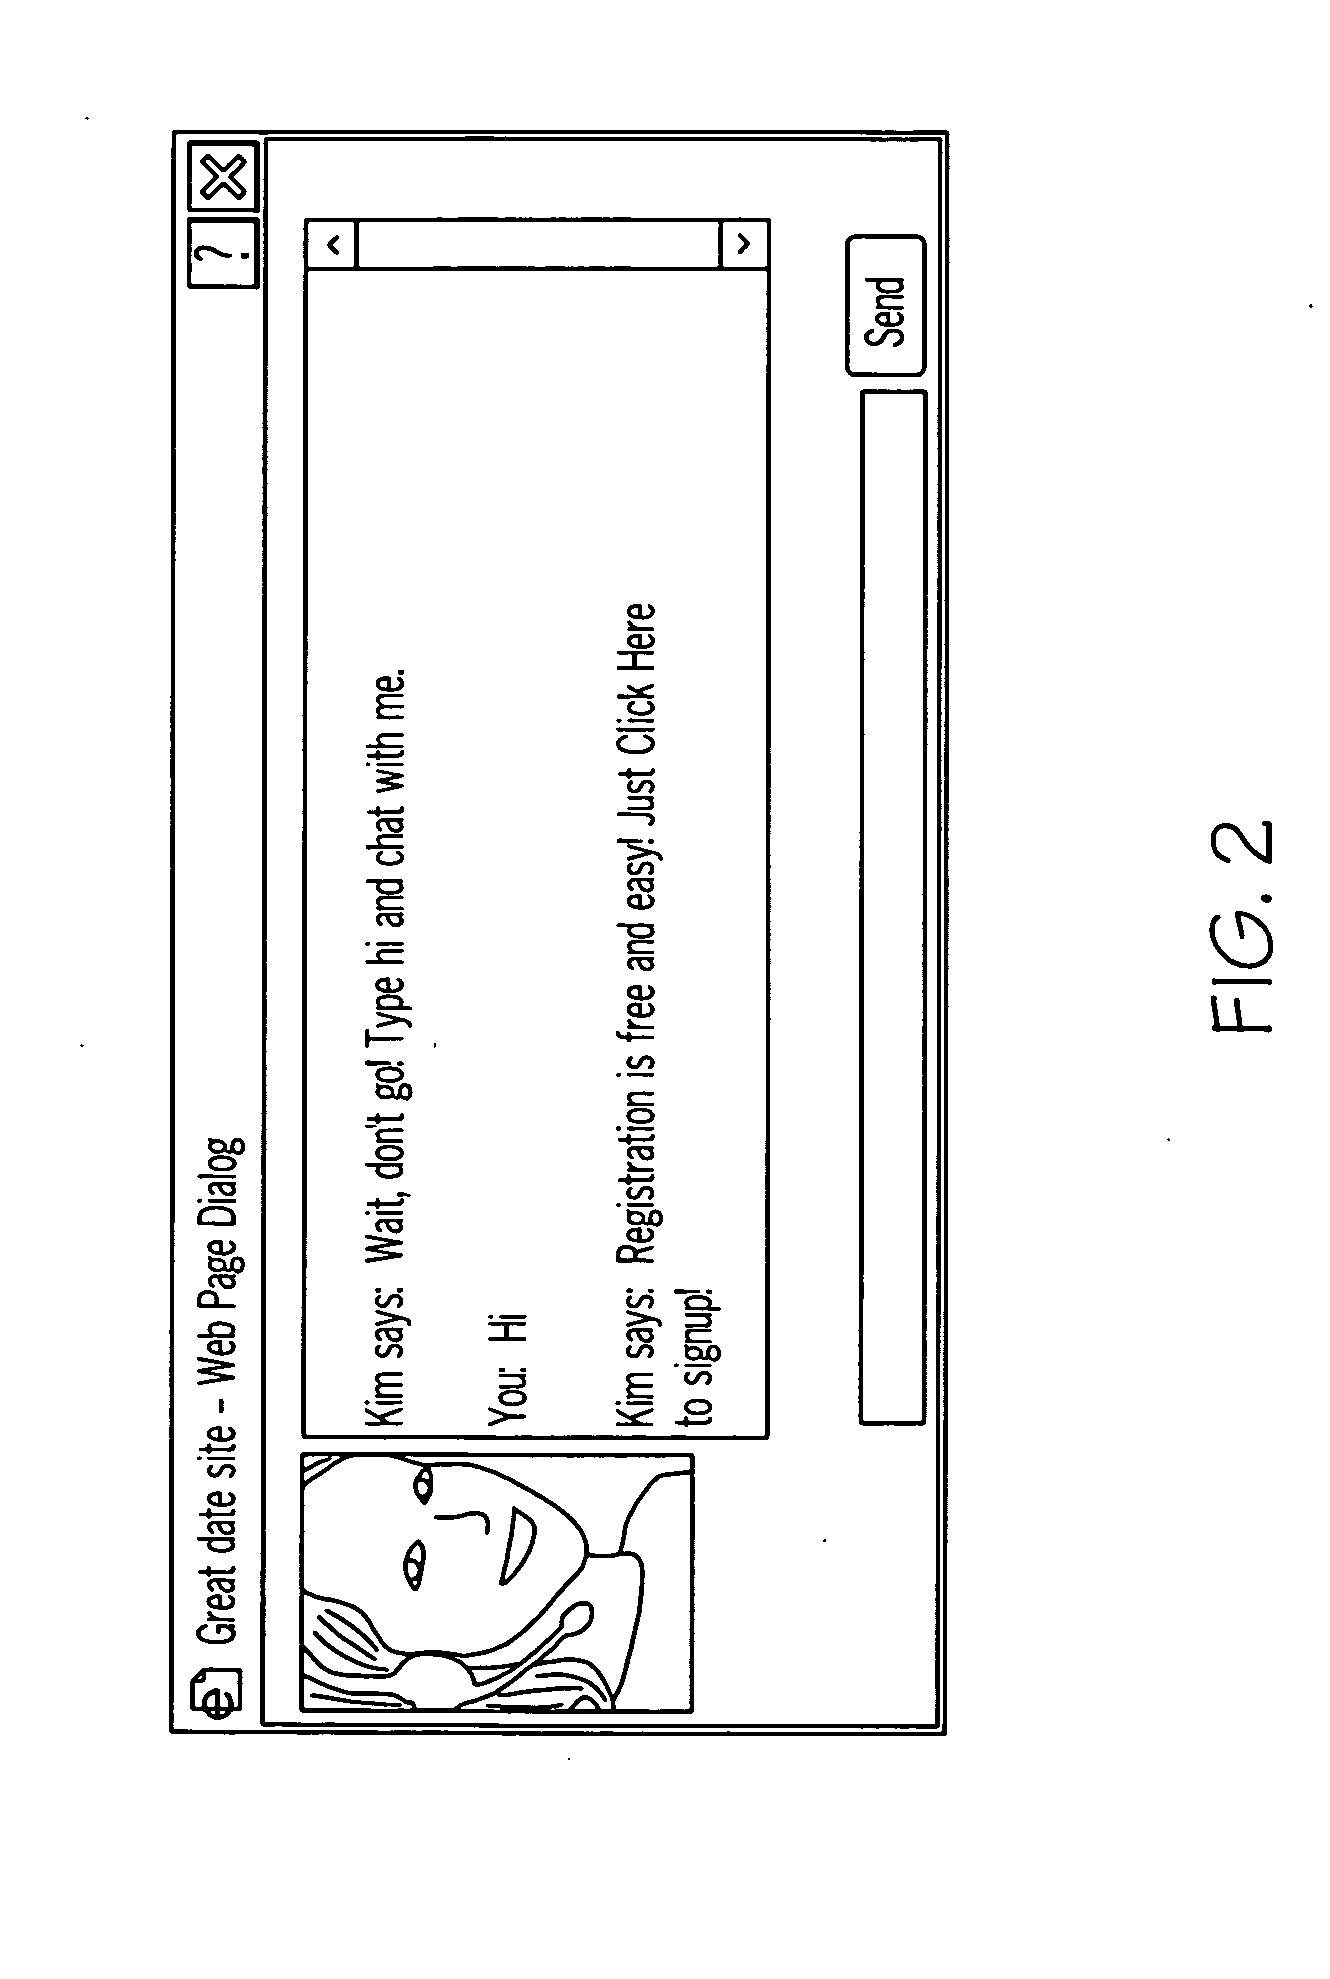 Management system for a conversational system